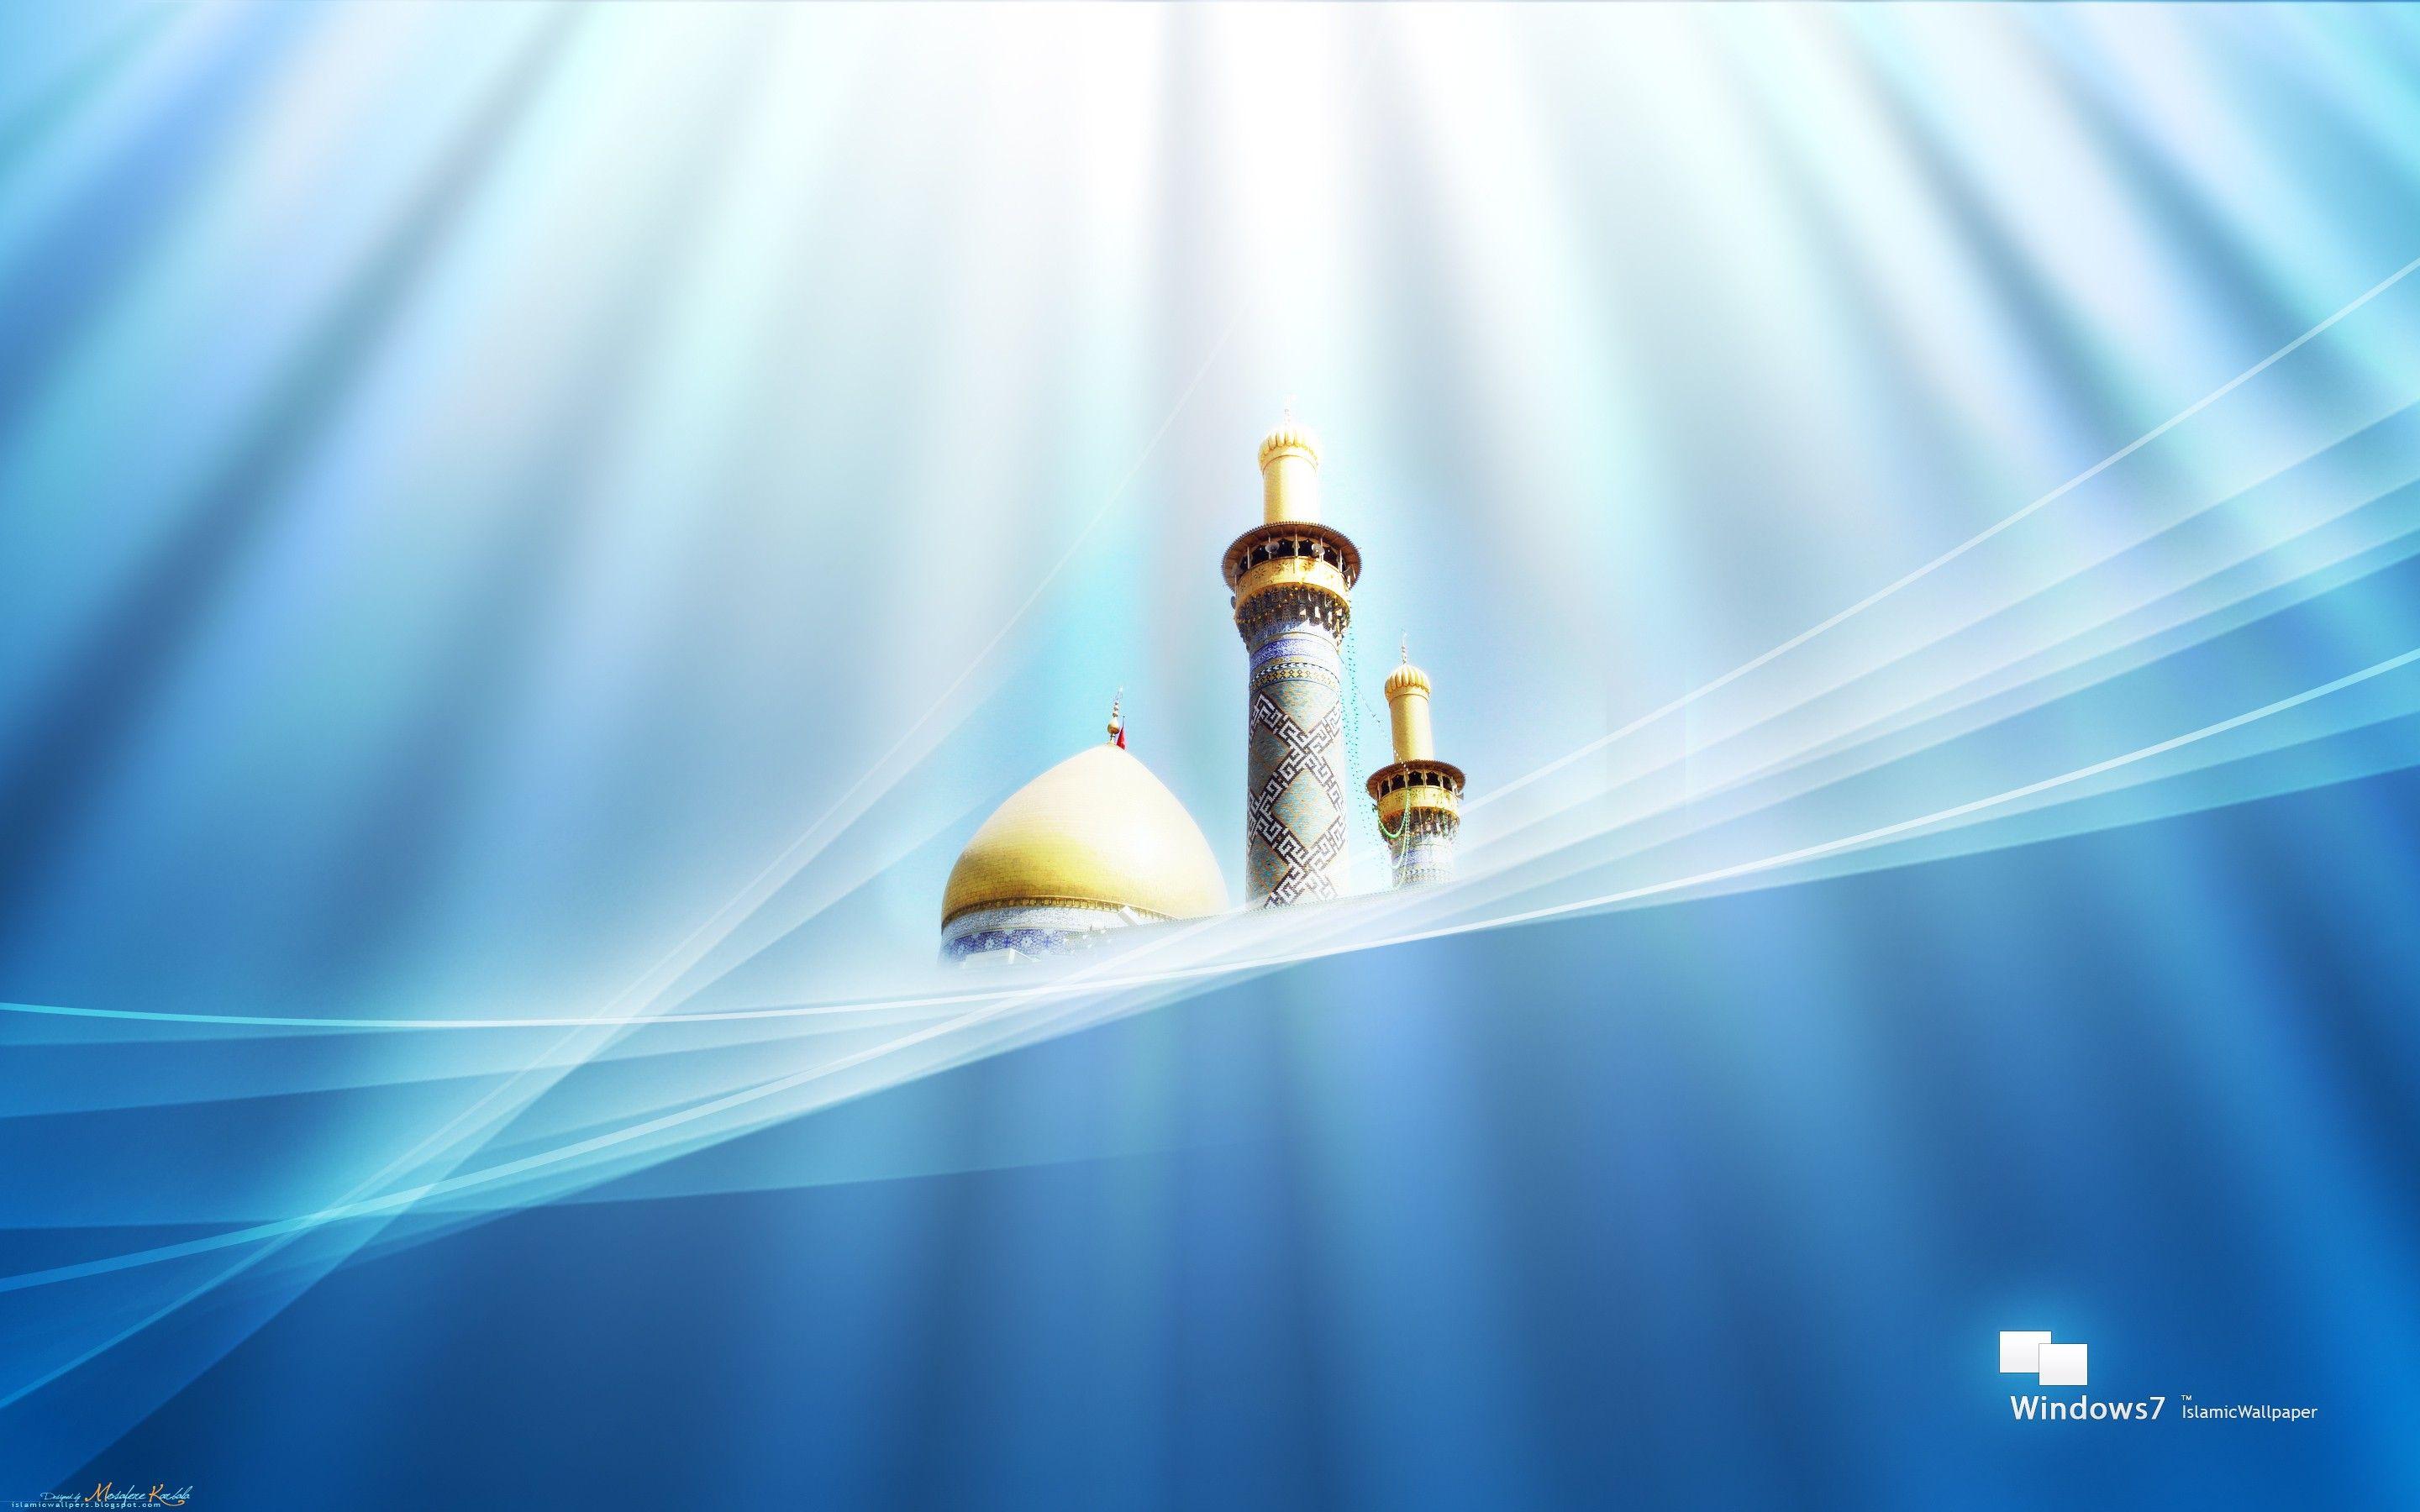 Islamic Backgrounds Image - Wallpaper Cave